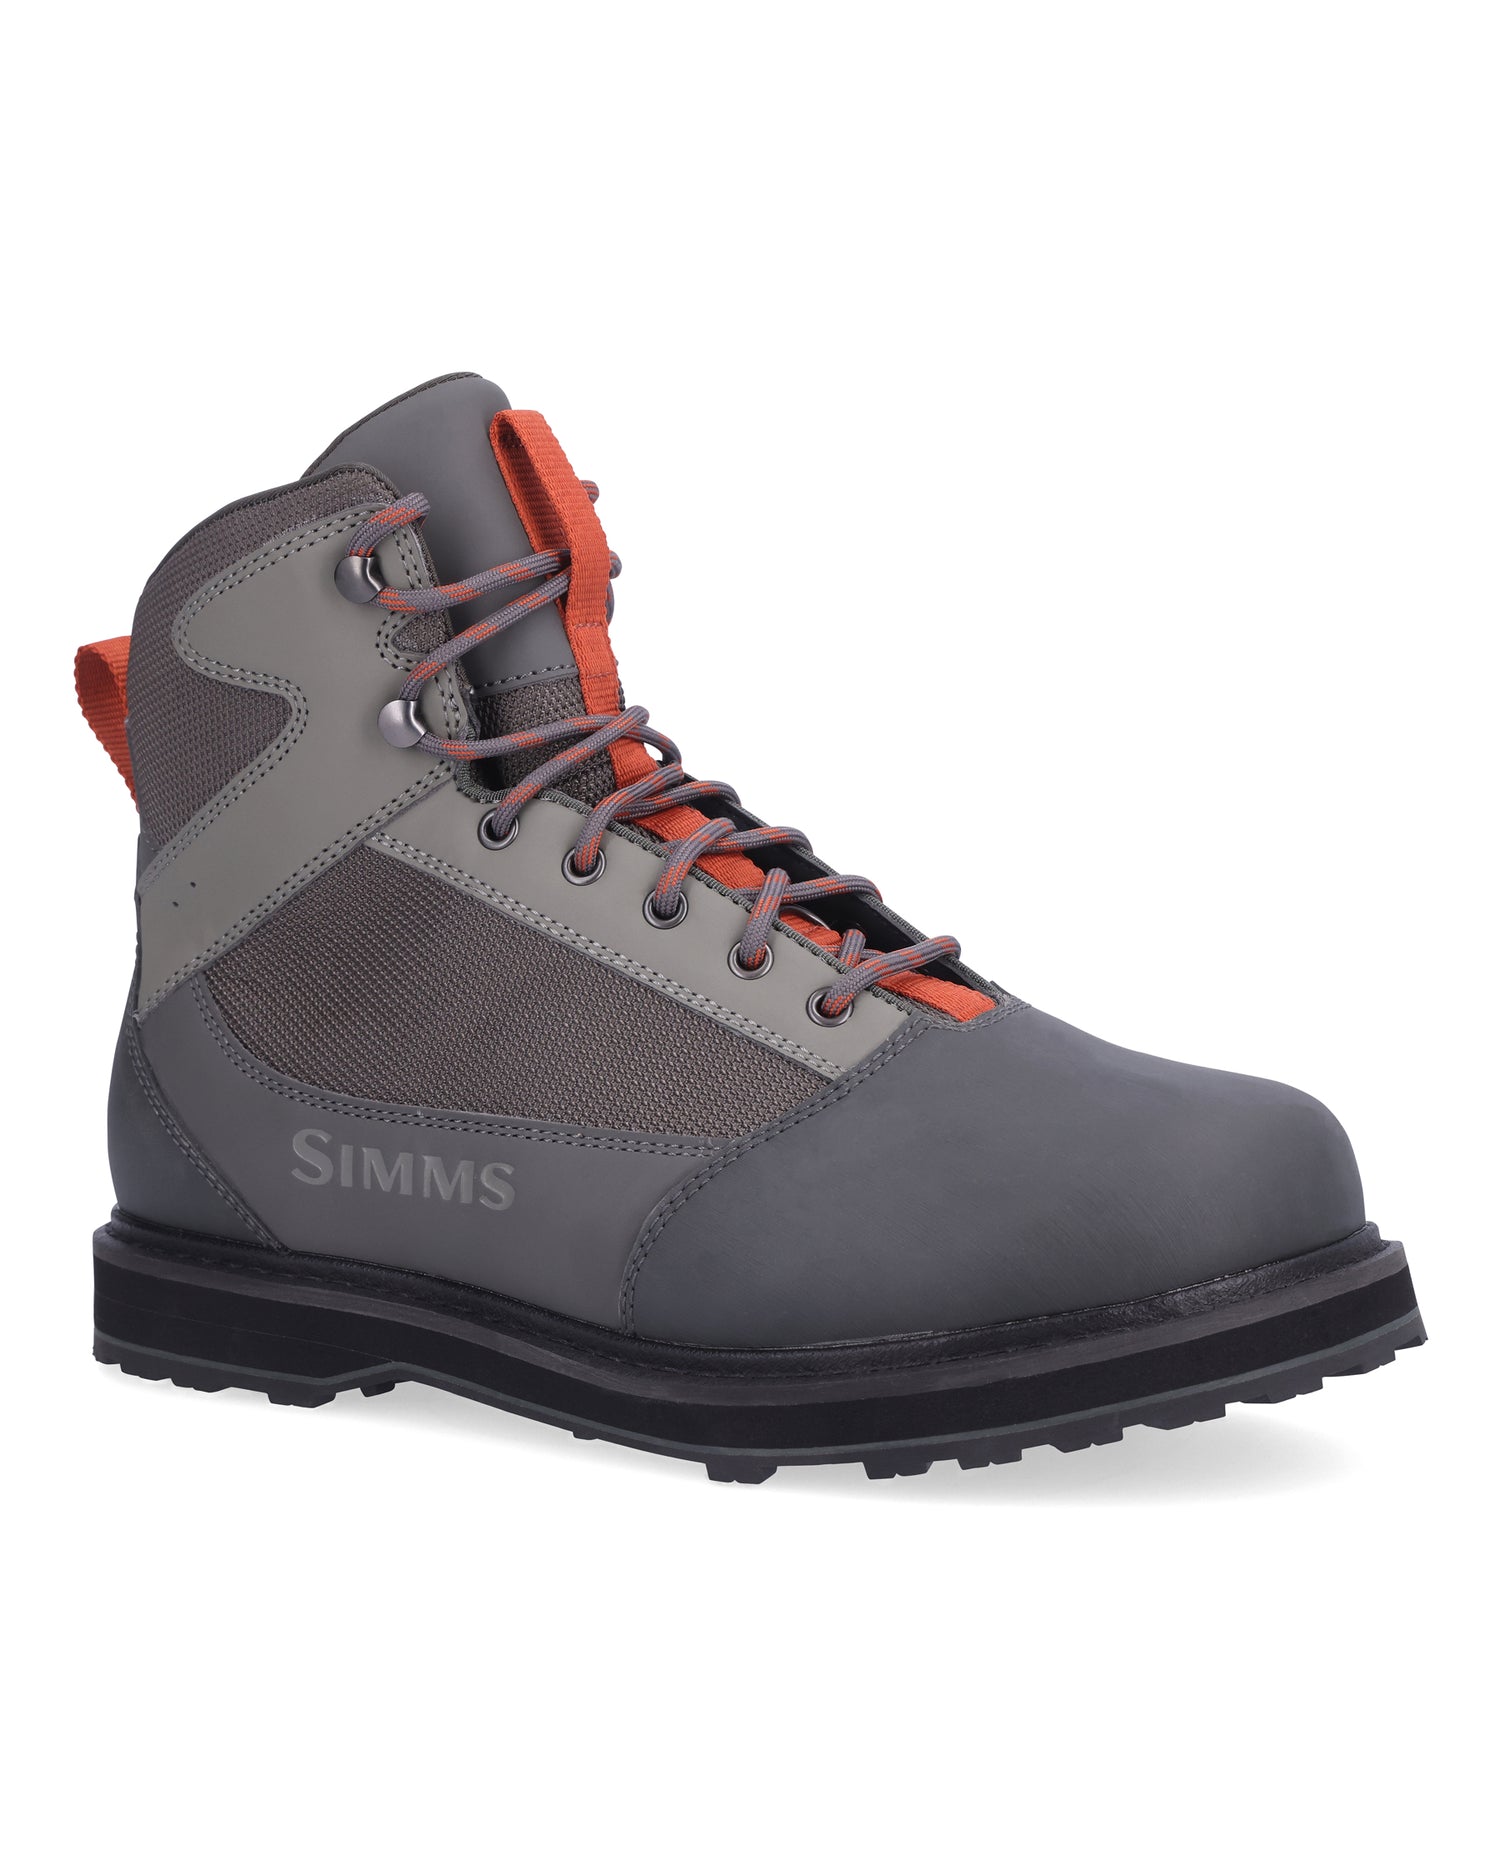 Wading Boots and Footwear for Fly Fishing — Red's Fly Shop